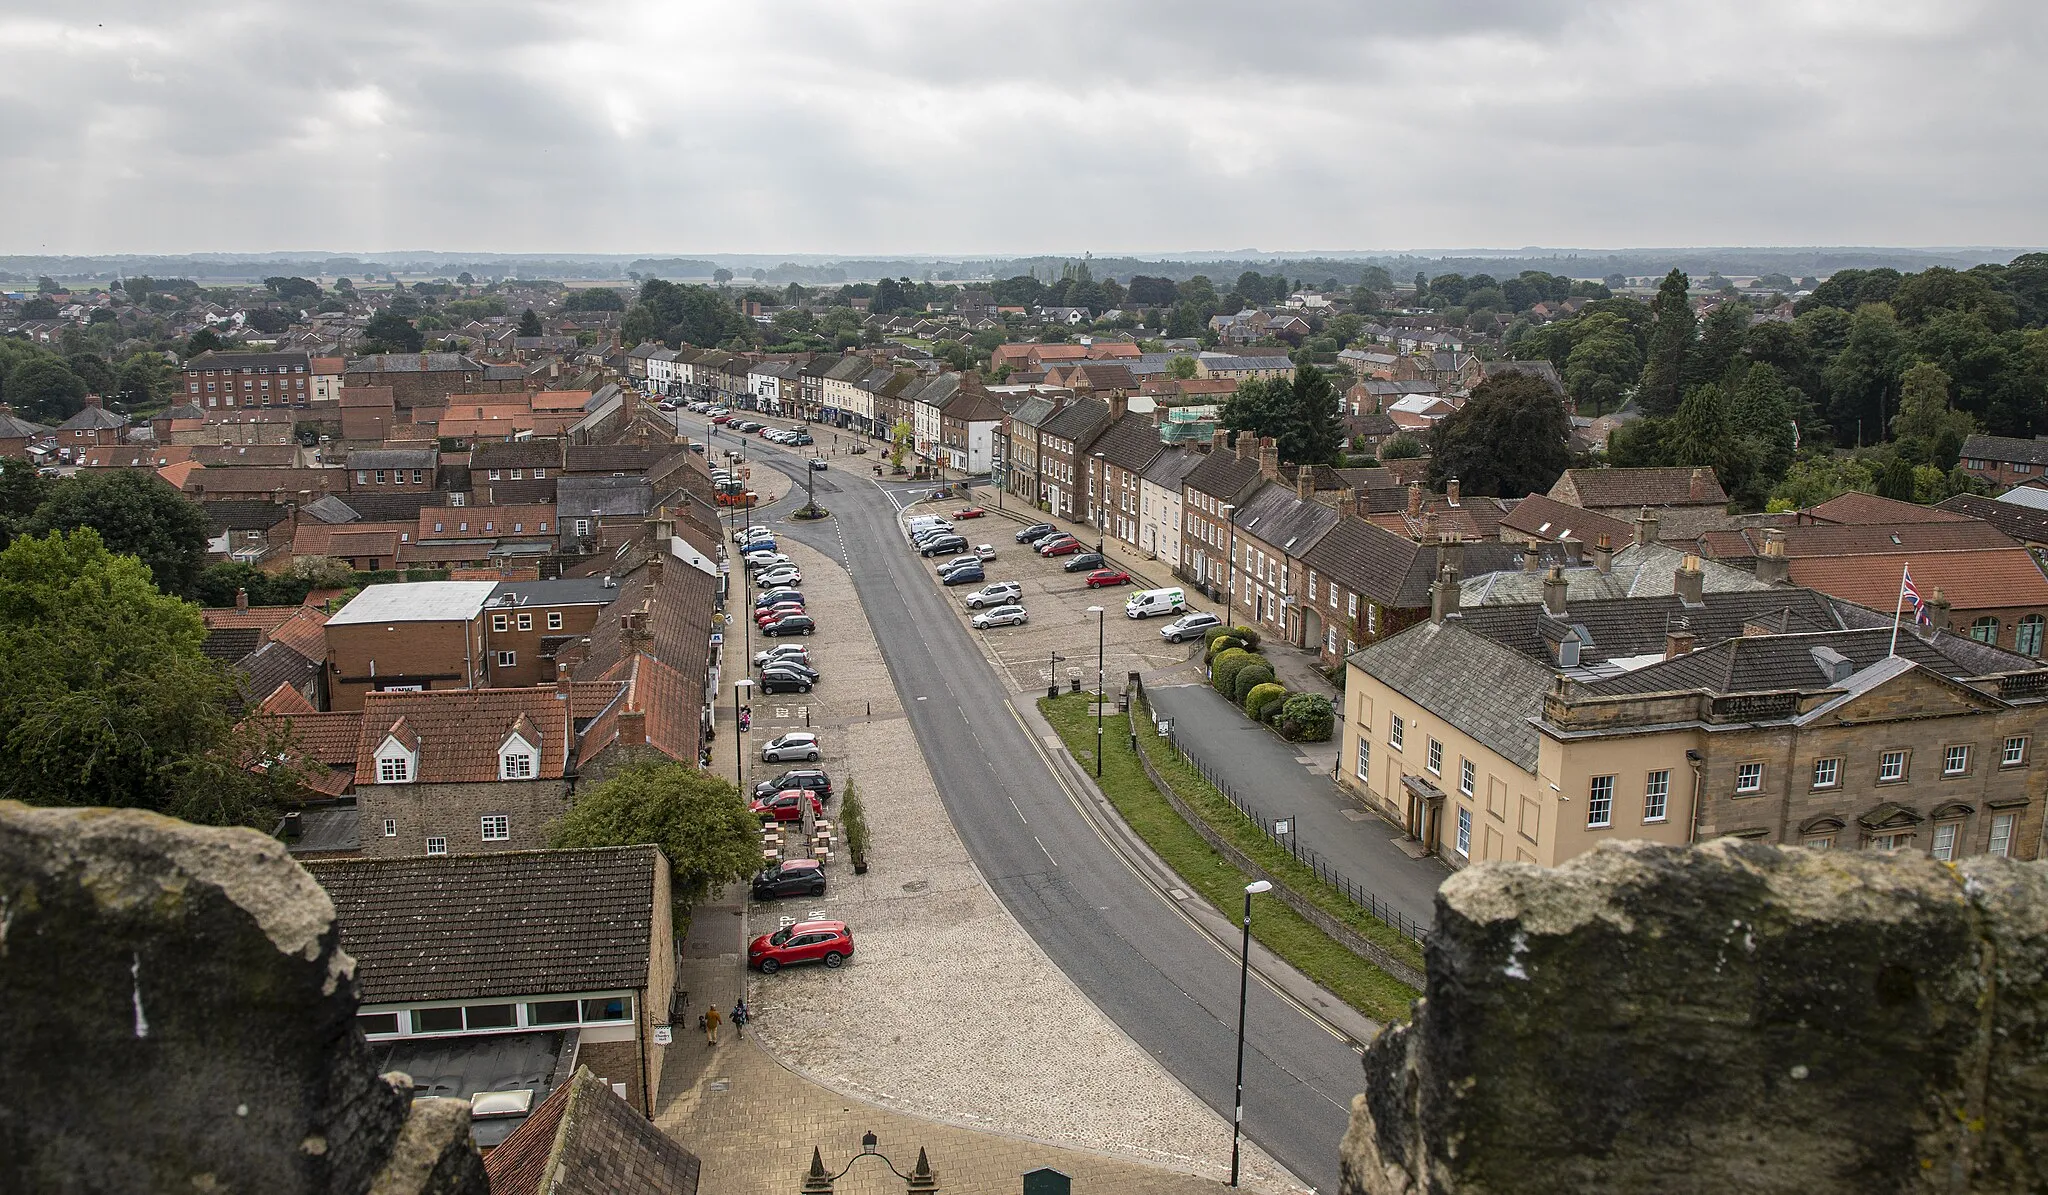 Photo showing: The town of Bedale from the tower of the Church of St Gregory. This is looking south over the main street through the town